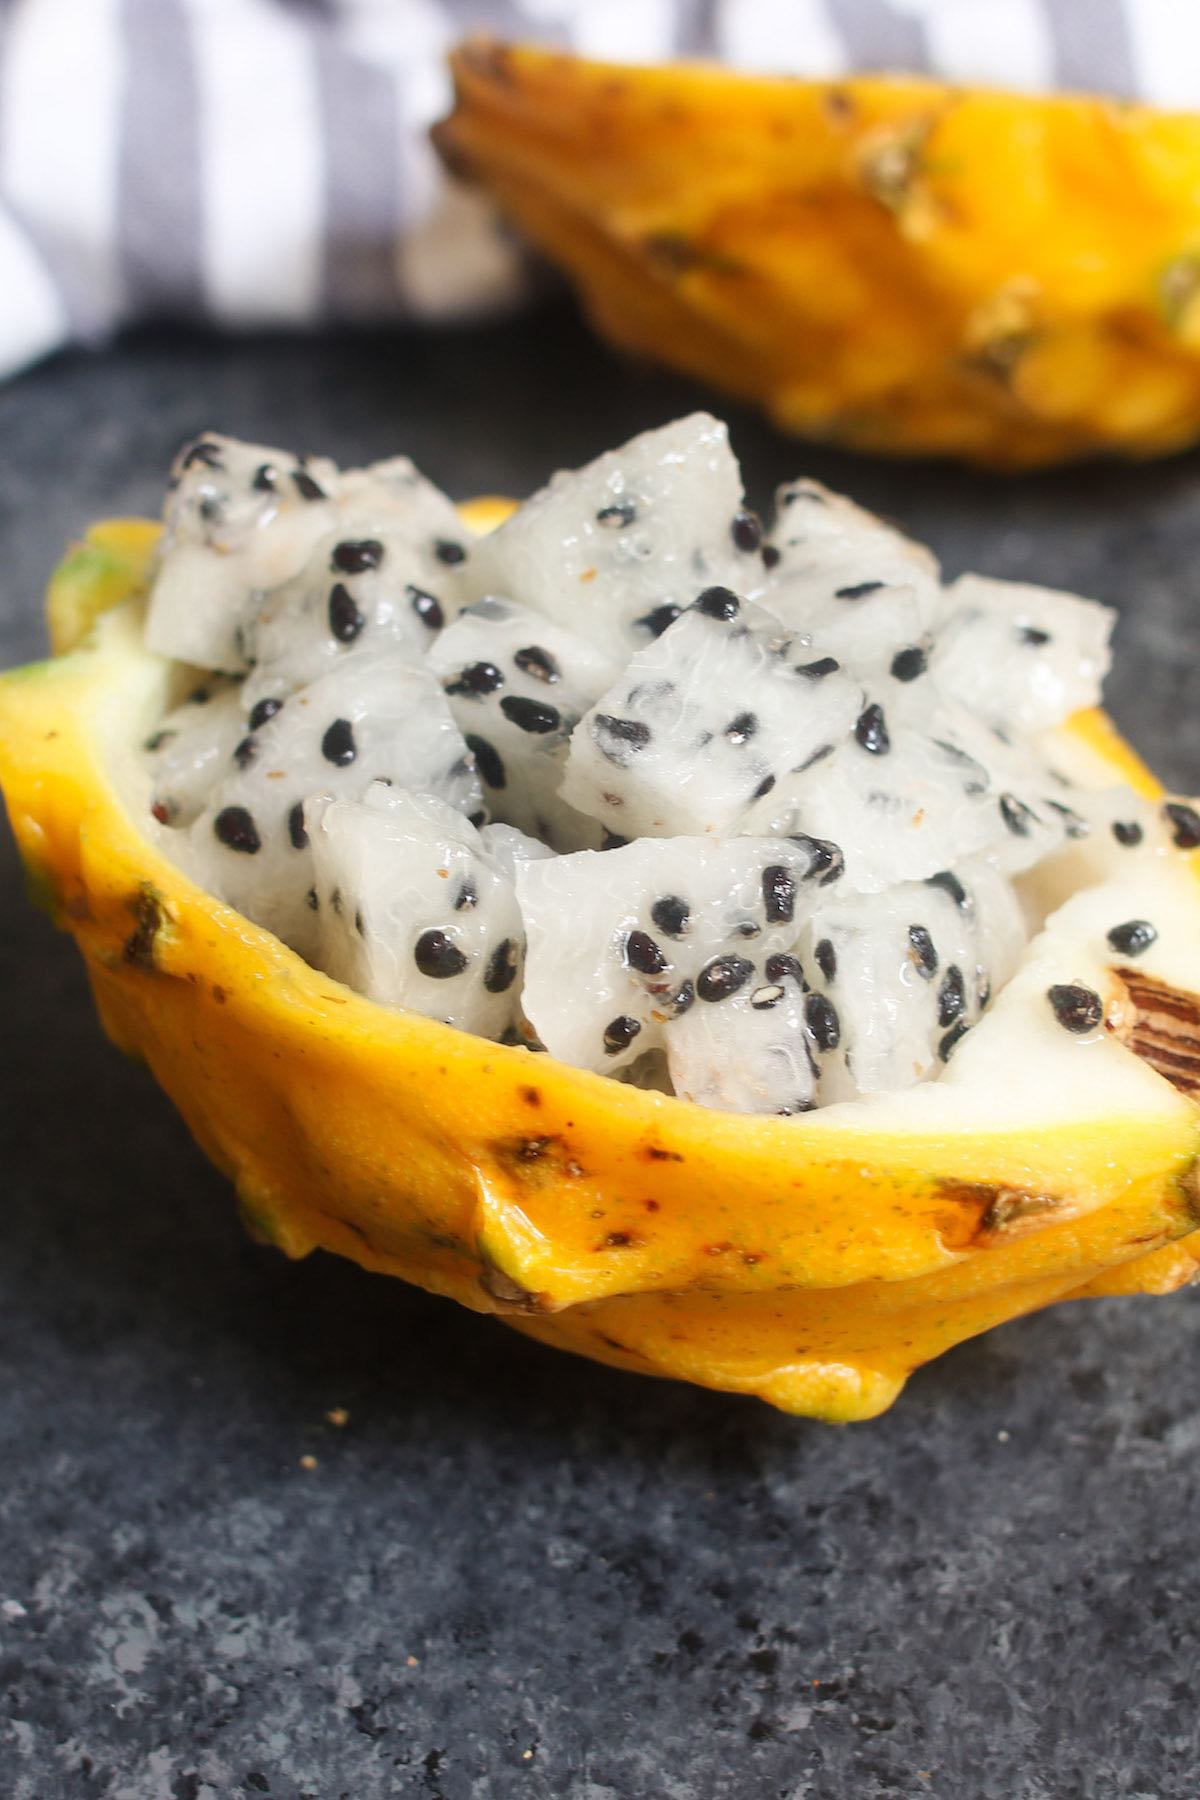 Yellow dragon fruit flesh cut into chunks and served in the skin